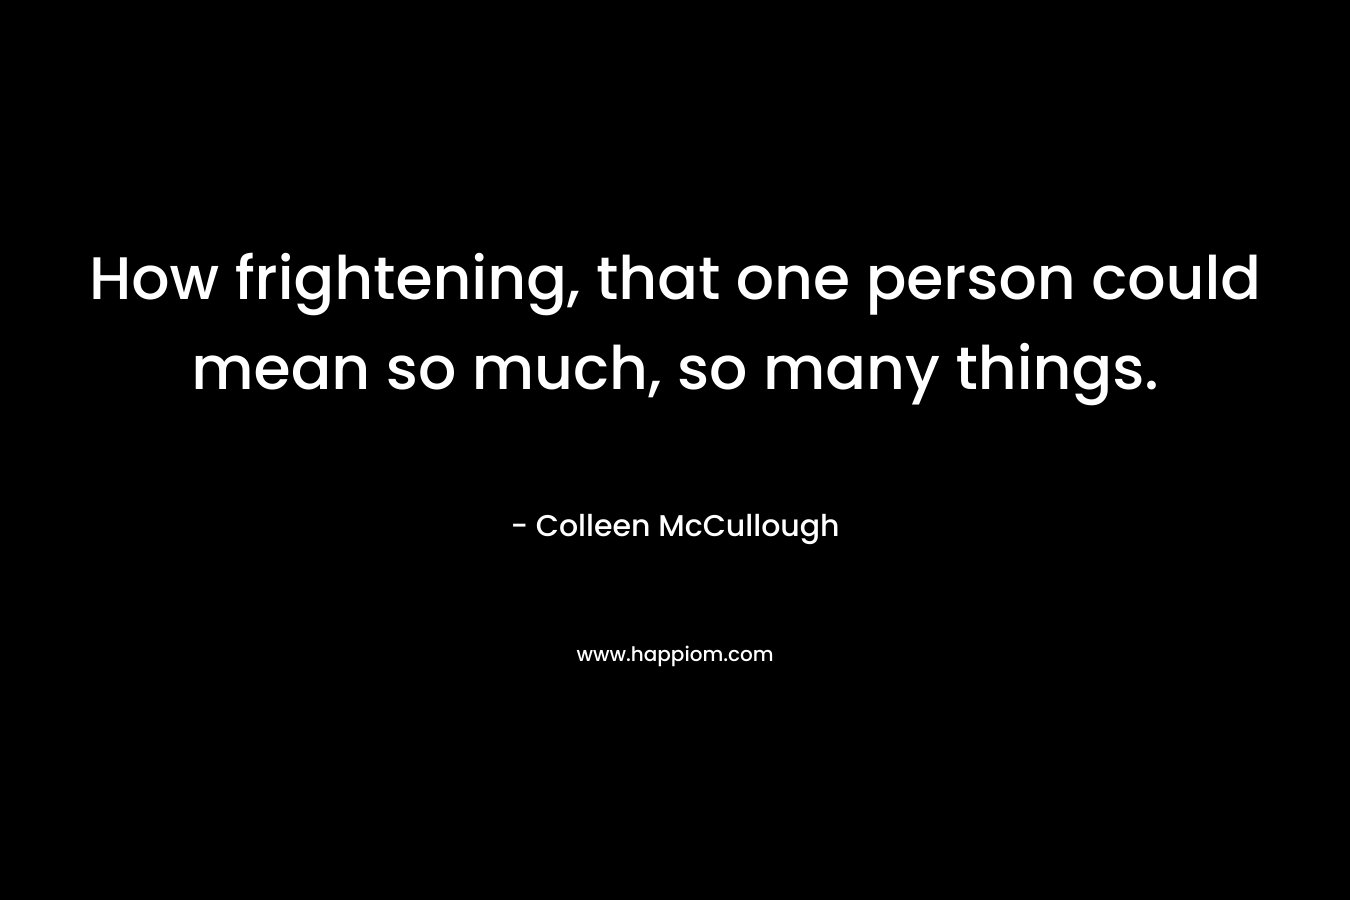 How frightening, that one person could mean so much, so many things. – Colleen McCullough